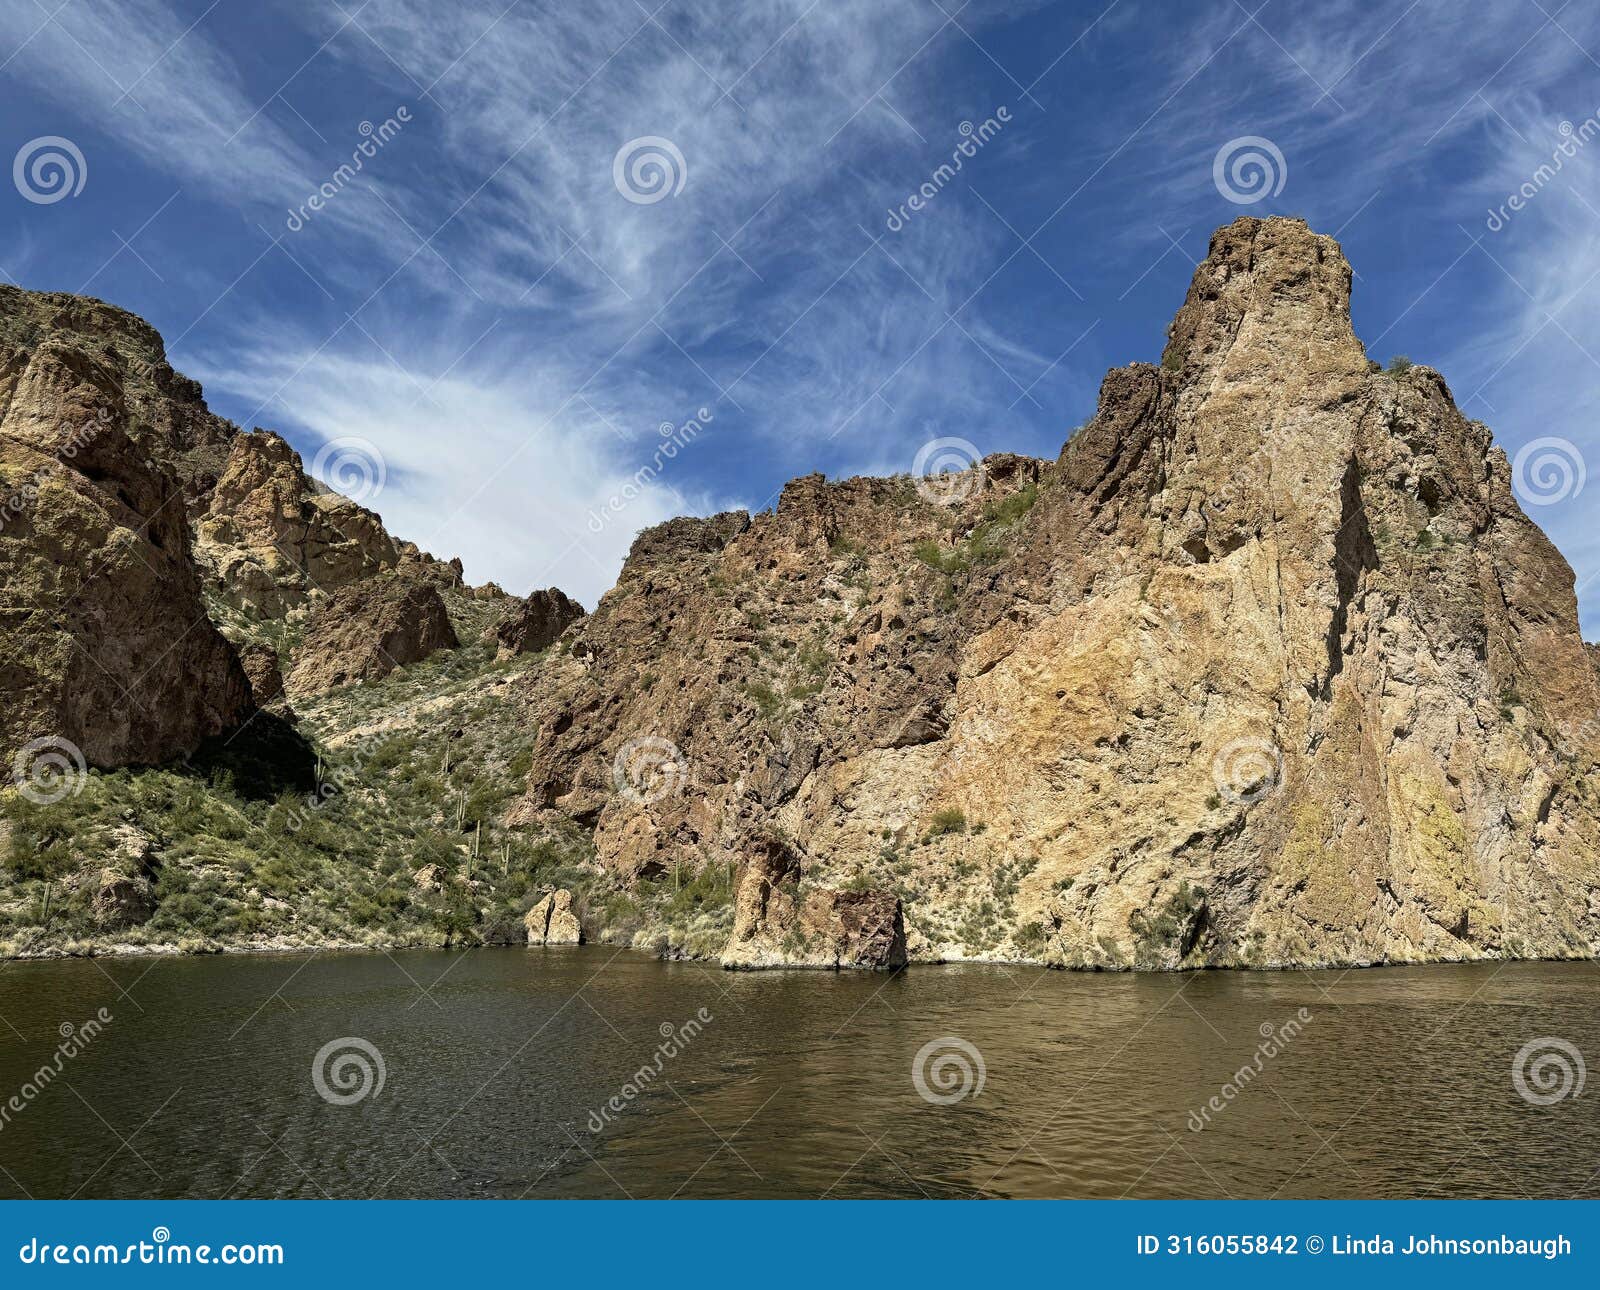 view of canyon lake and rock formations from a steamboat in arizona